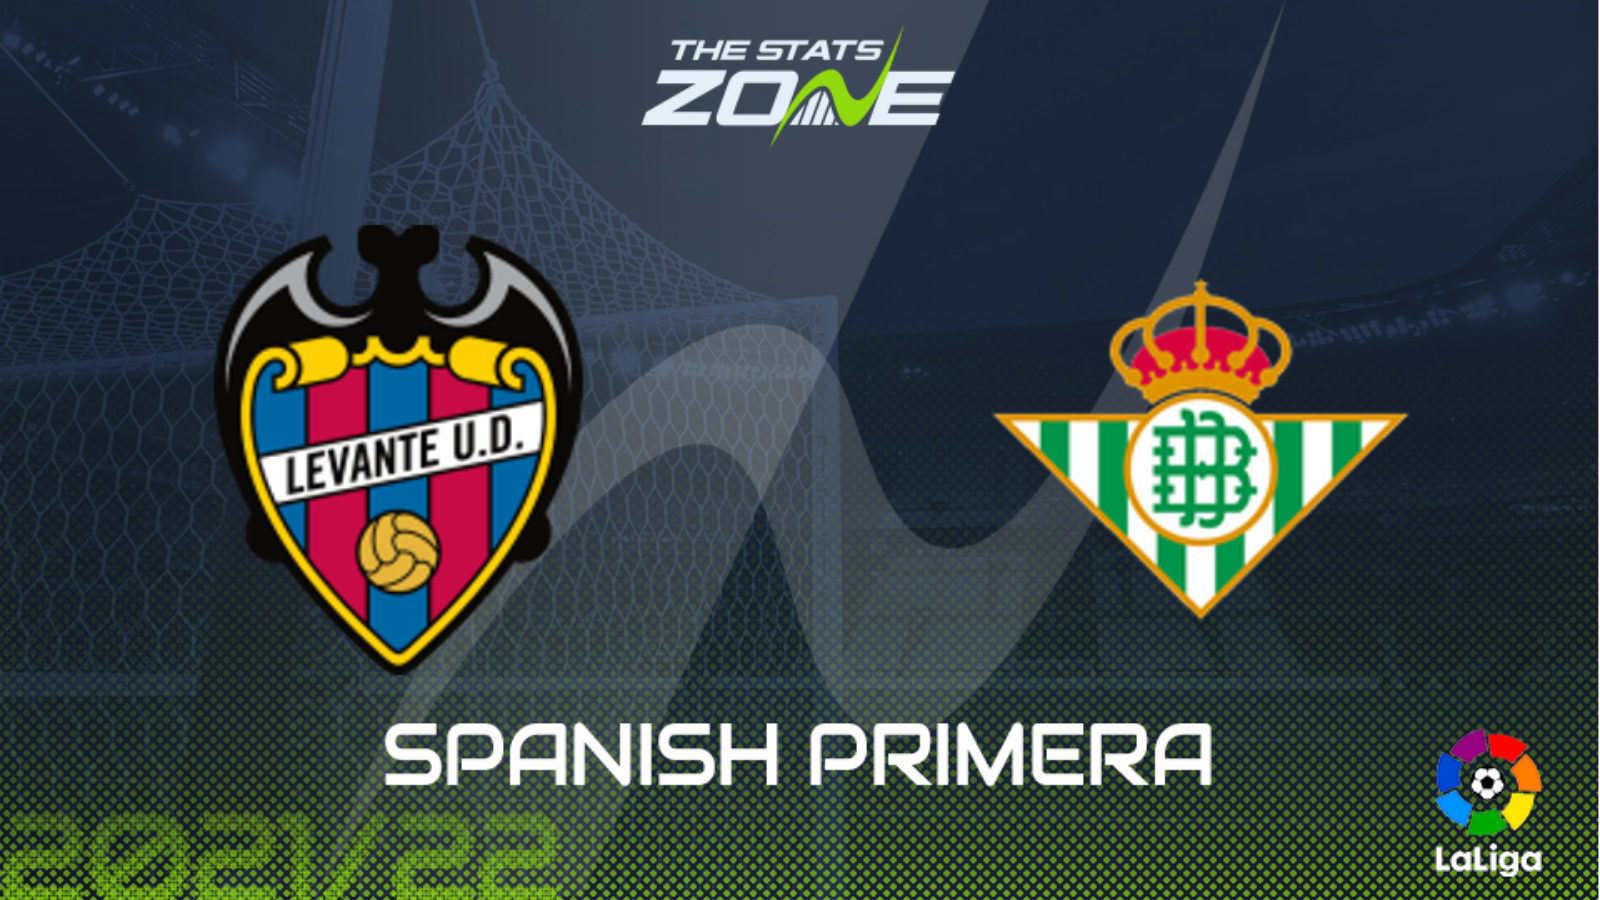 Levante vs real betis betting preview ethereum serenity mining